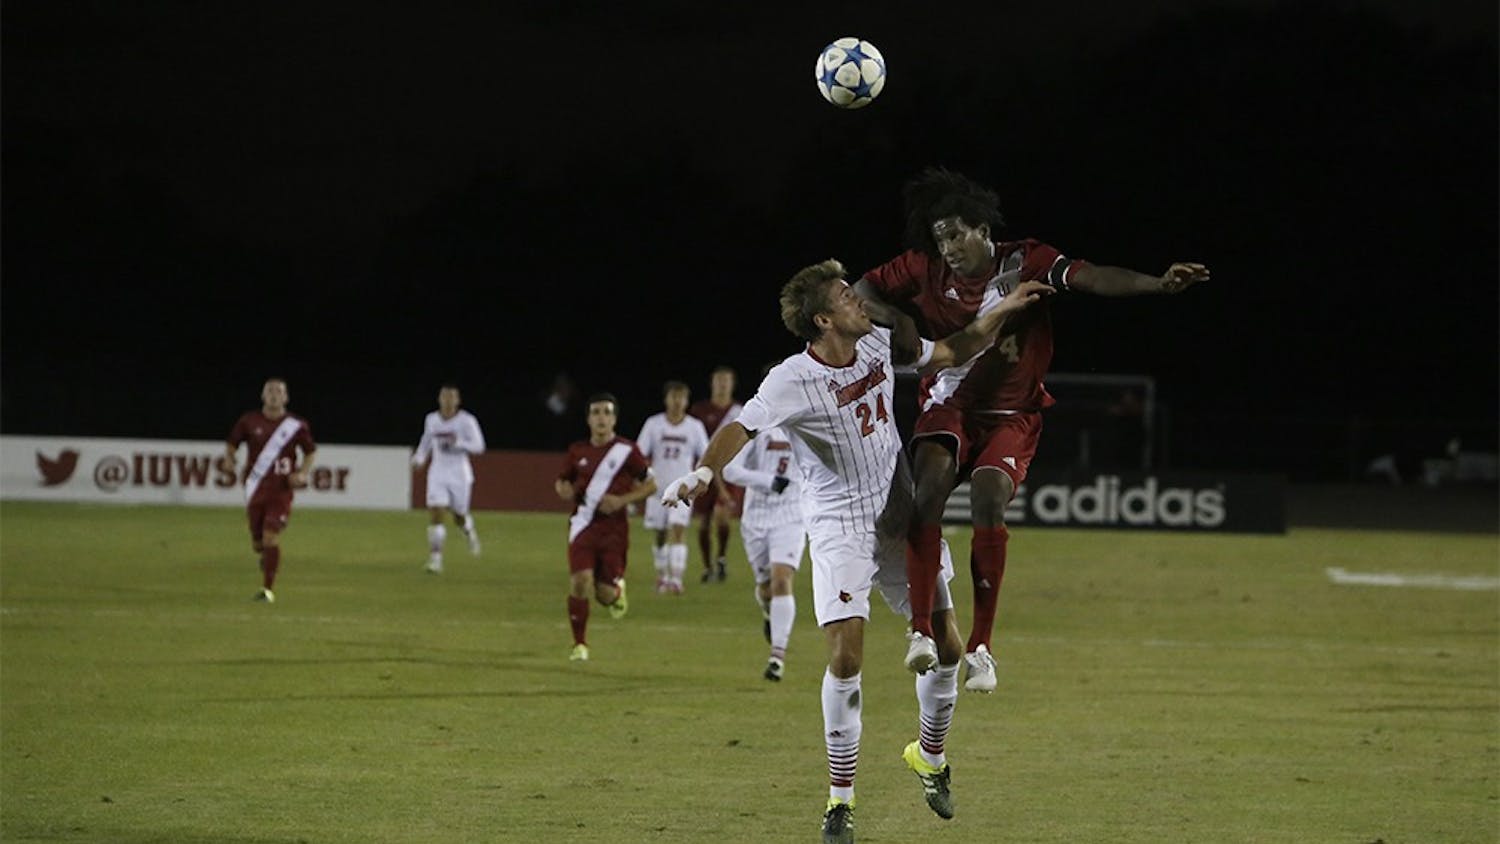 Senior Forward Femi Hollanger-Janzen fights for the ball during IU's game against Louisville Tuesday night at the Bill Armstrong Stadium.